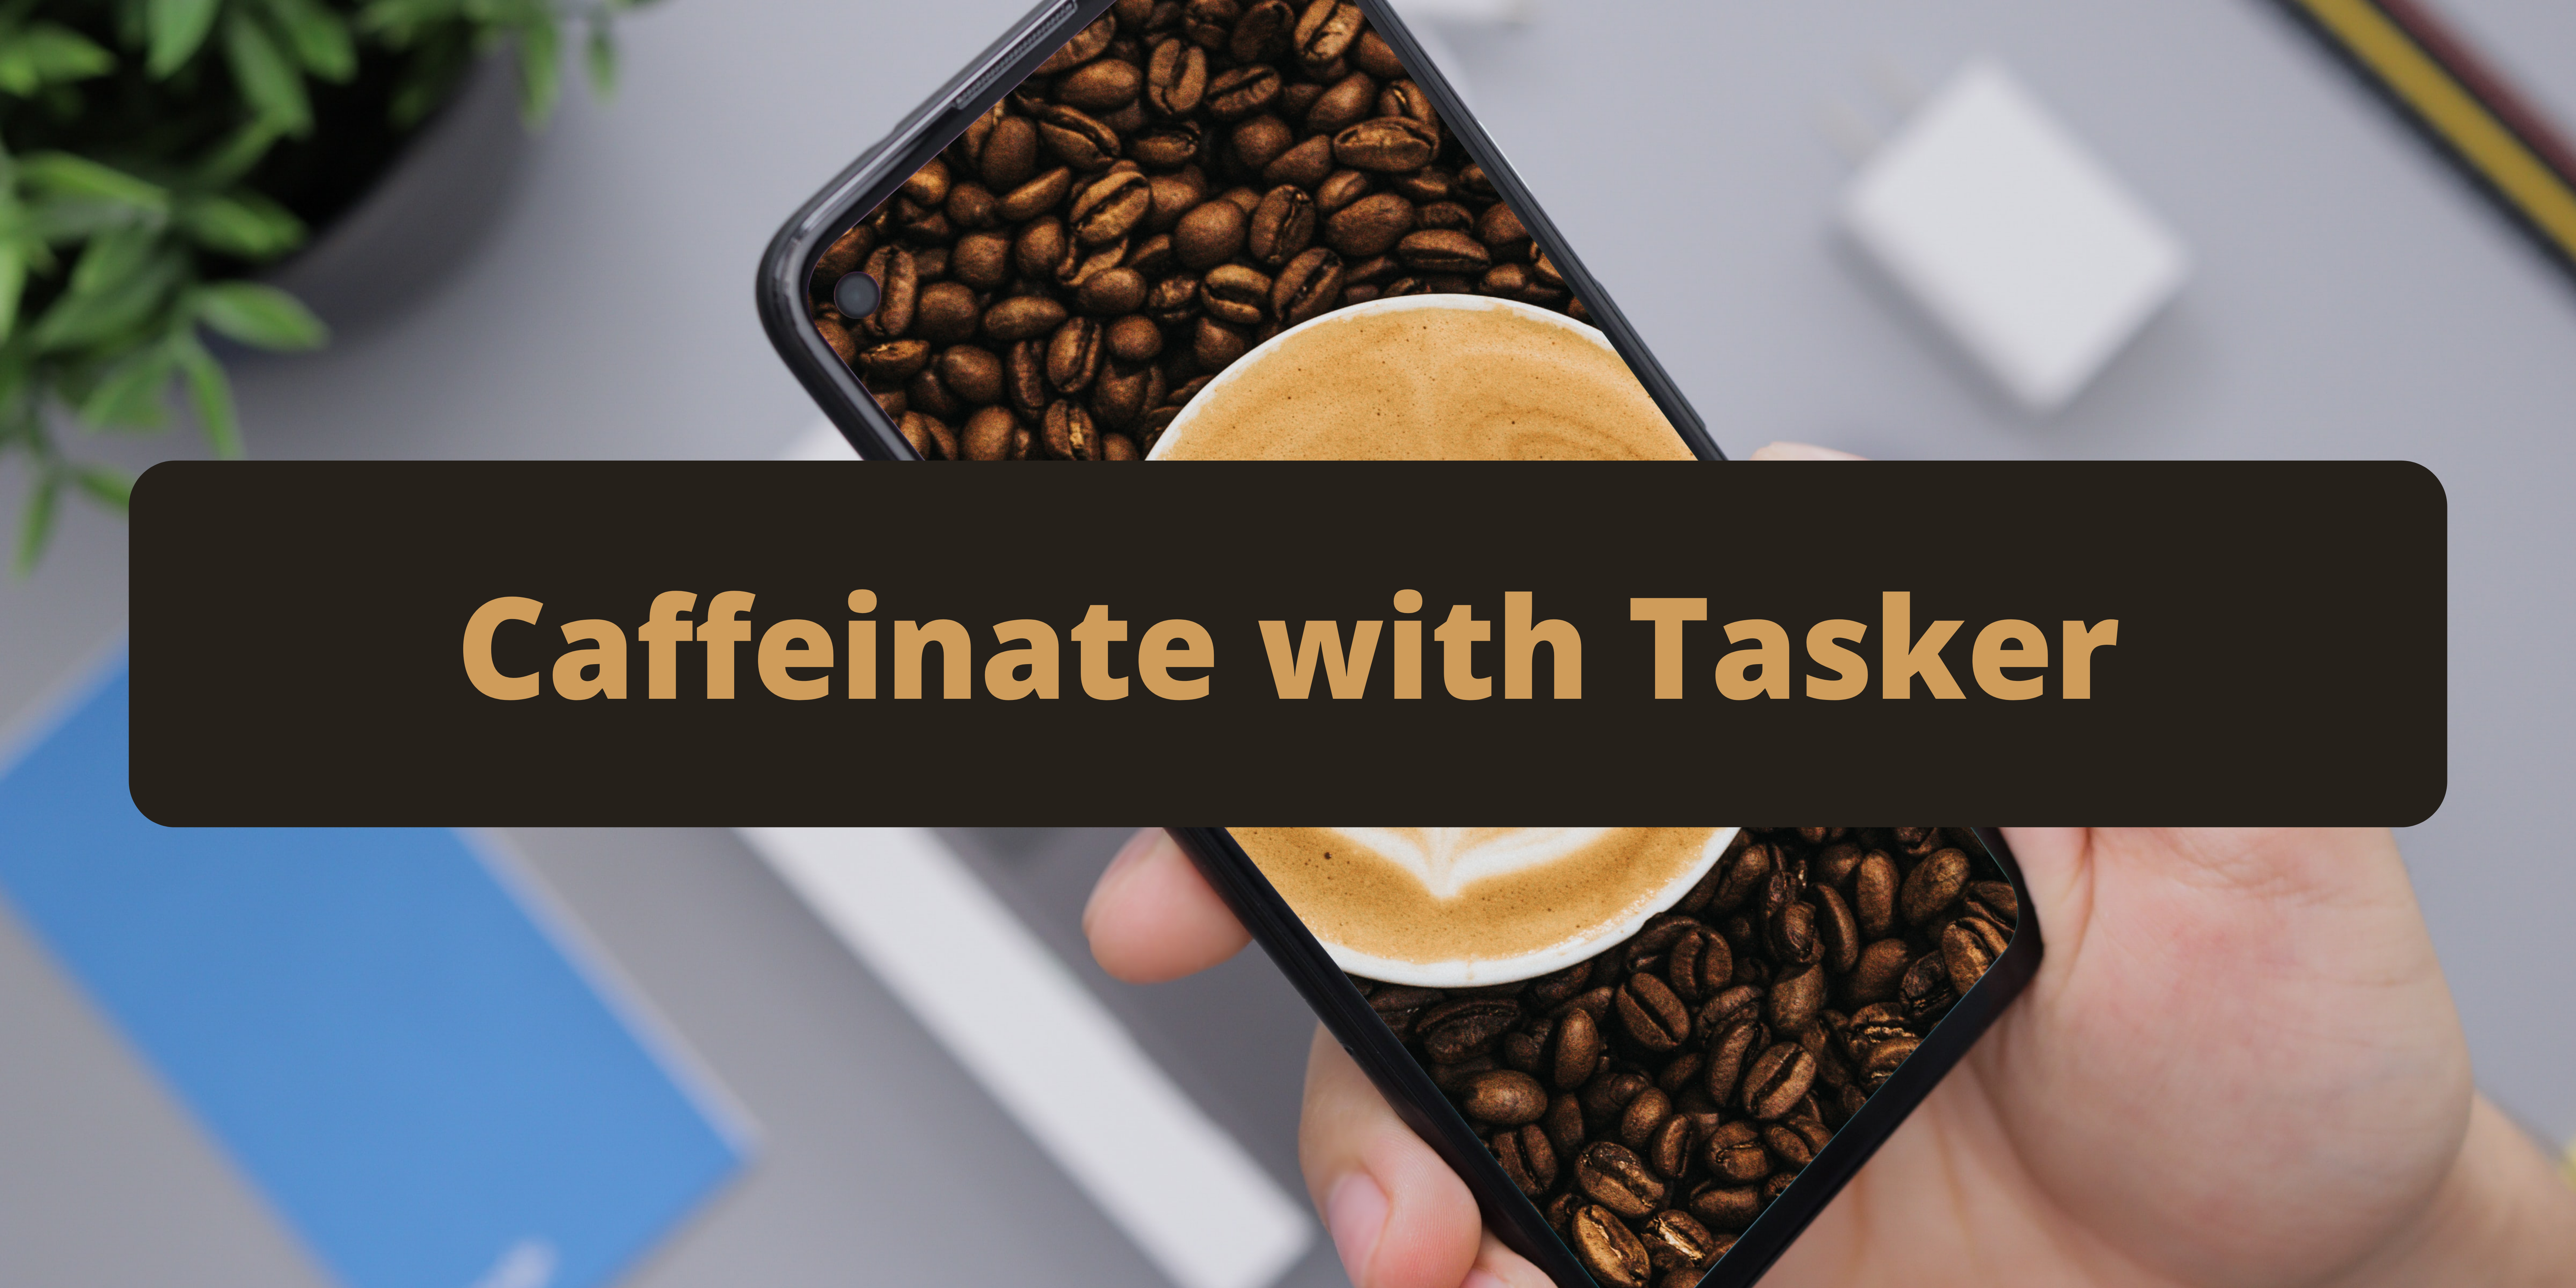 Caffeinate with Tasker. There are several apps | by Piras | Geek Culture | Medium